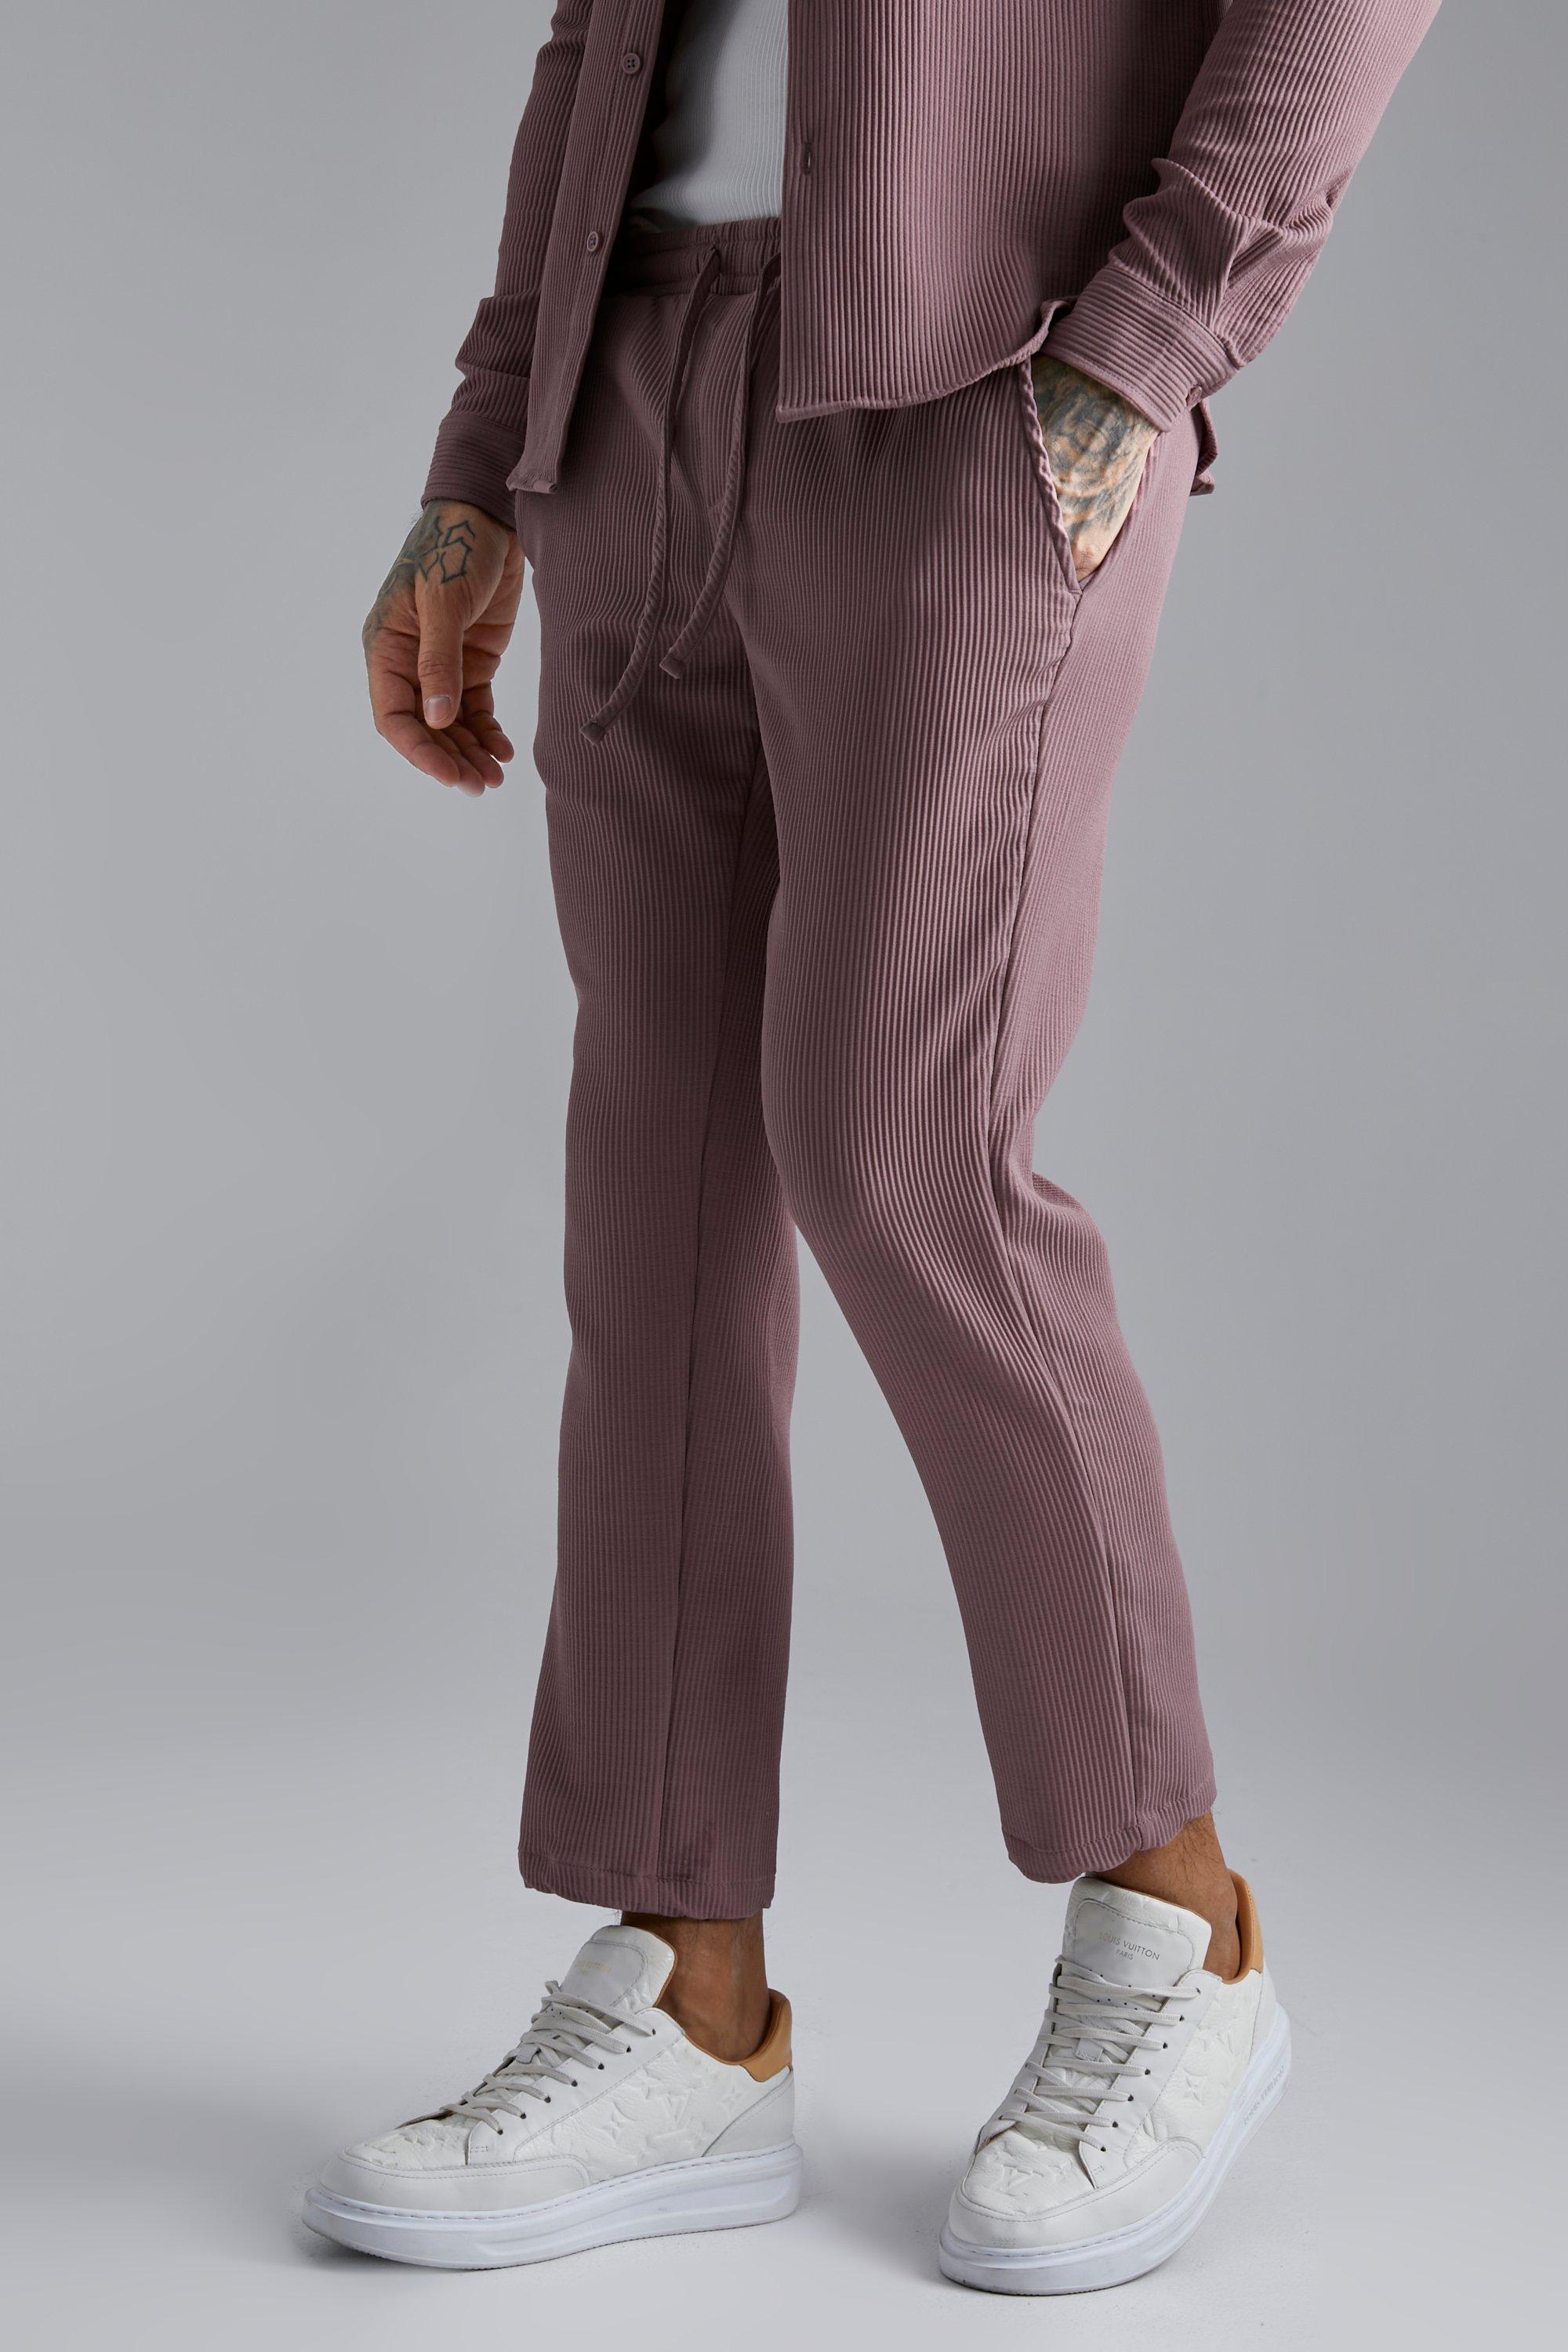 Womens Clothing Trousers Purple Jeckerson Cotton Trouser in Mauve Slacks and Chinos Full-length trousers 